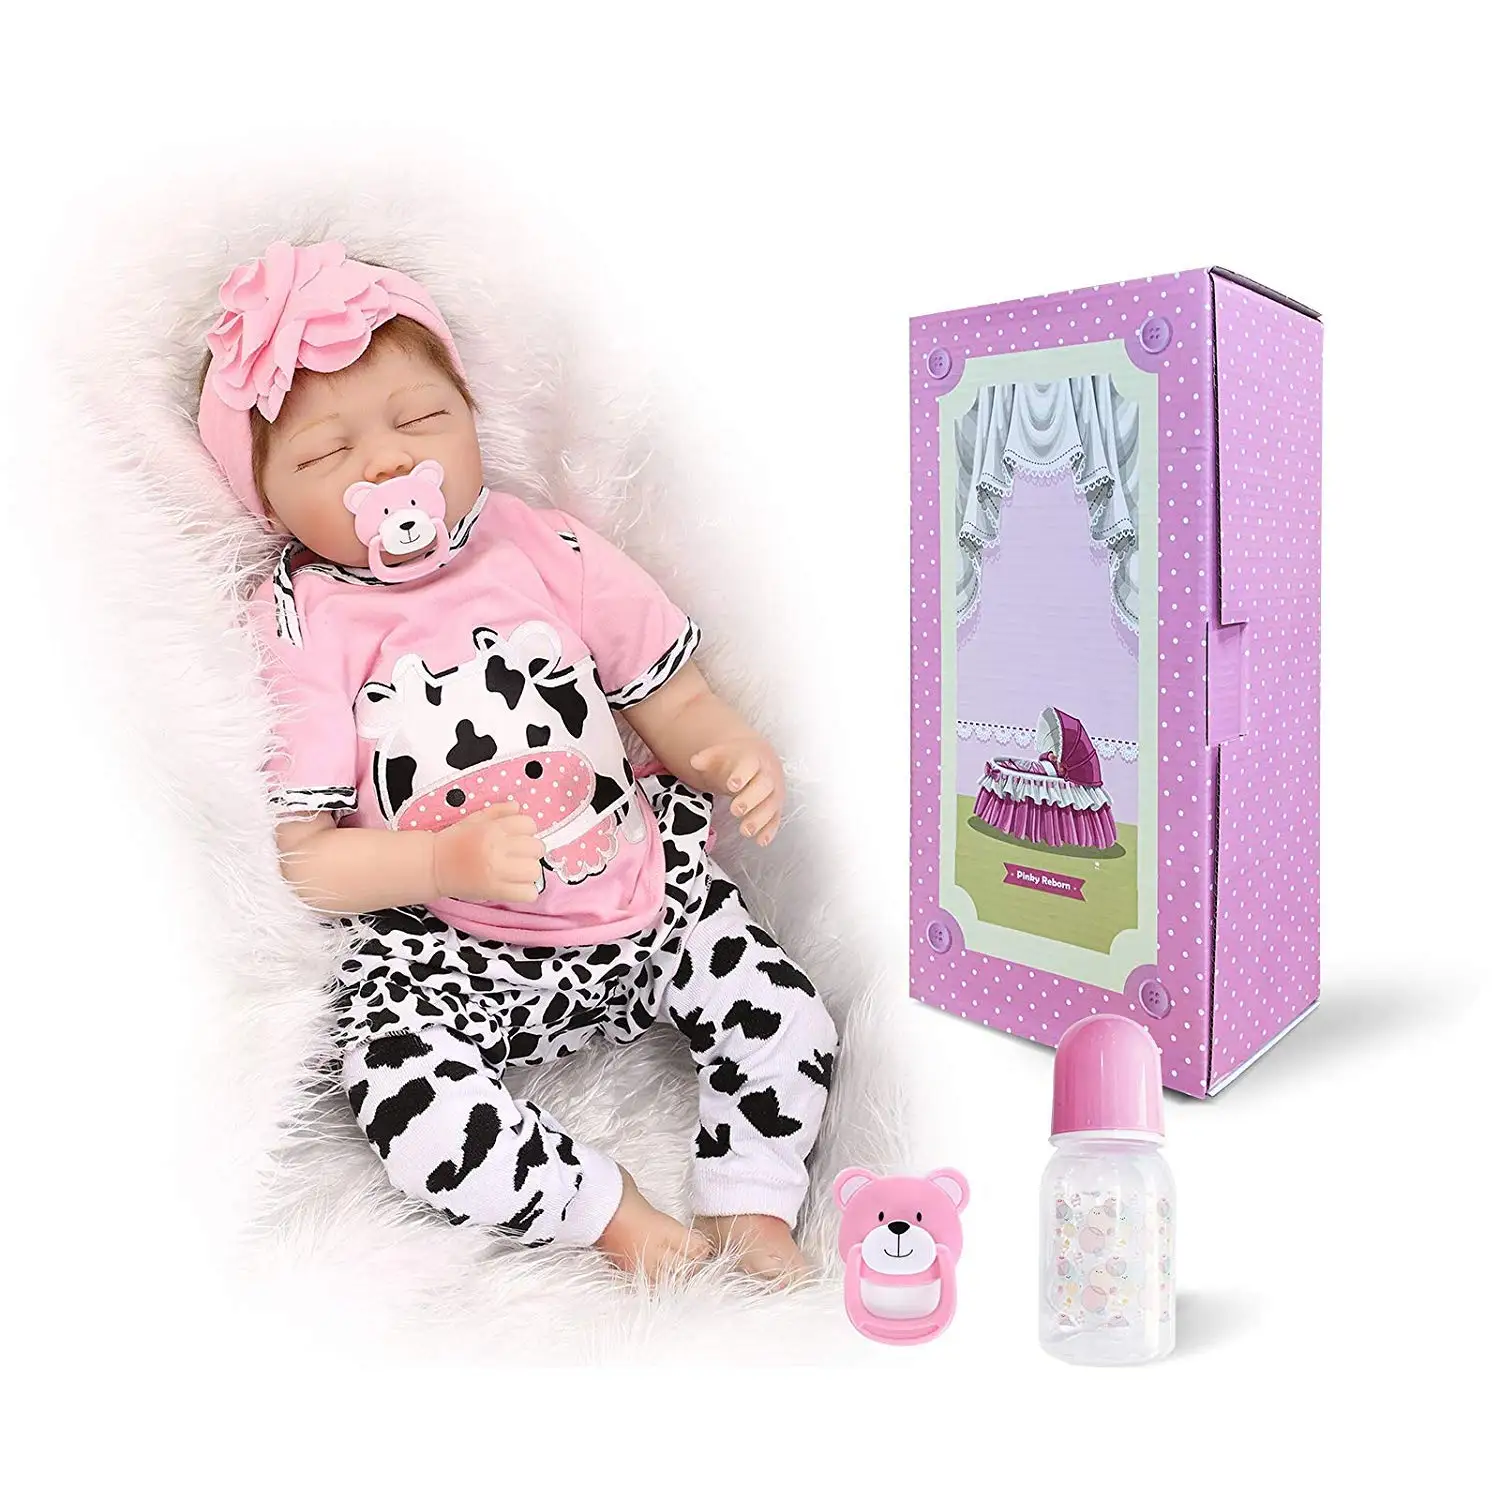 Details about   22 Inch Sleeping Reborn Baby Dolls Girl,Realistic Baby Reborn,Soft Weighted 